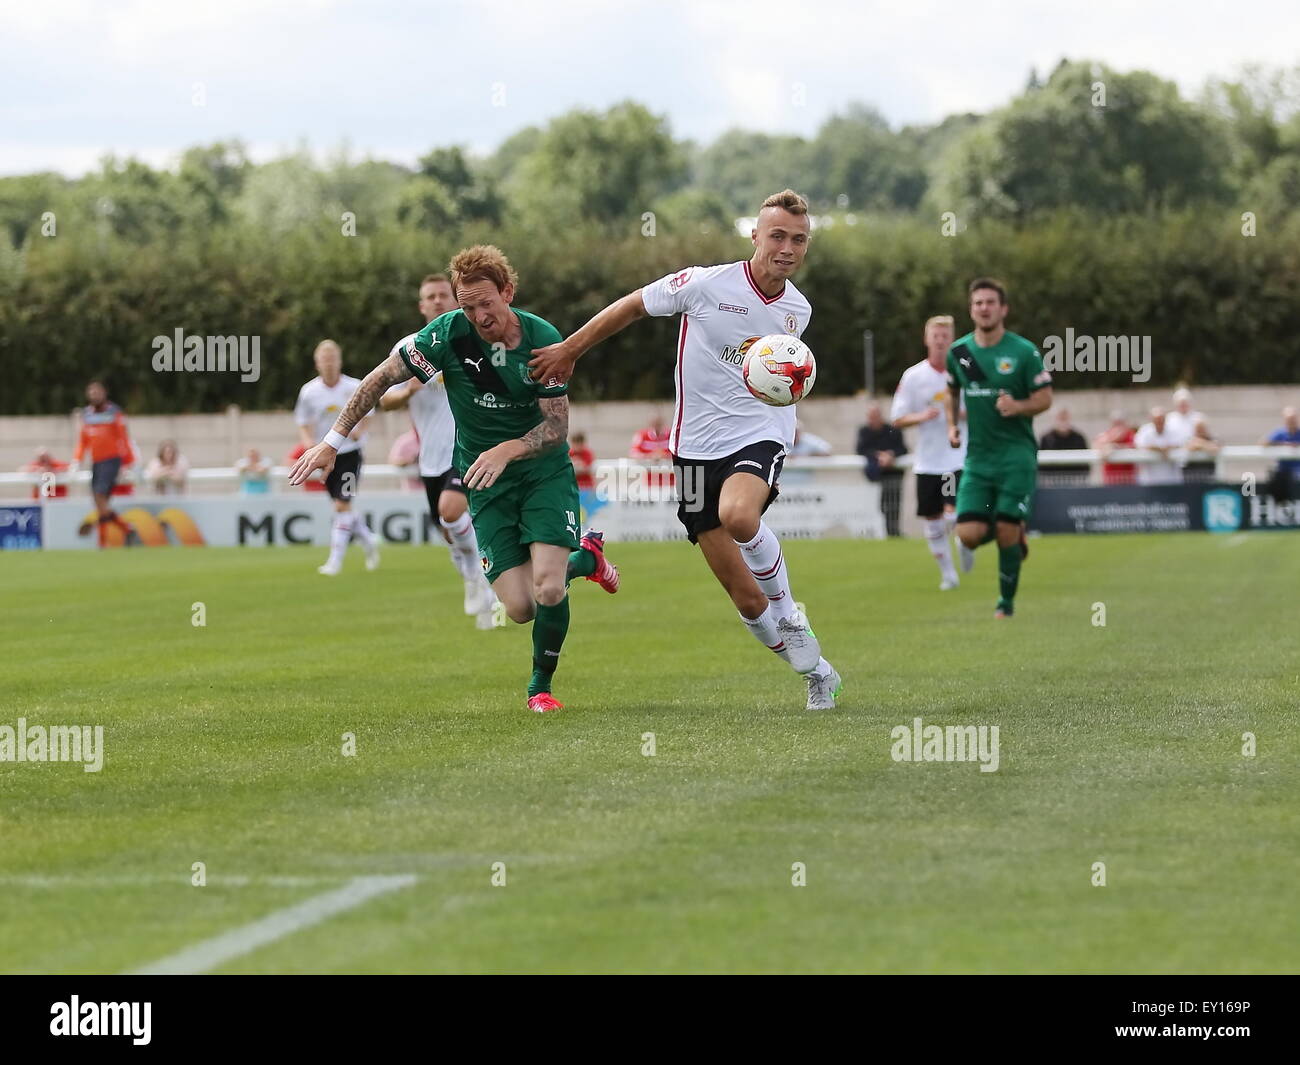 Nantwich, UK. 19th July, 2015. Nantwich Town's Steve Jones powers forward with Crewe Alexandra's George Ray defending during the pre-season friendly match at The Weaver Stadium, Nantwich as Nantwich Town entertained Crewe Alexandra. Credit:  SJN/Alamy Live News Stock Photo